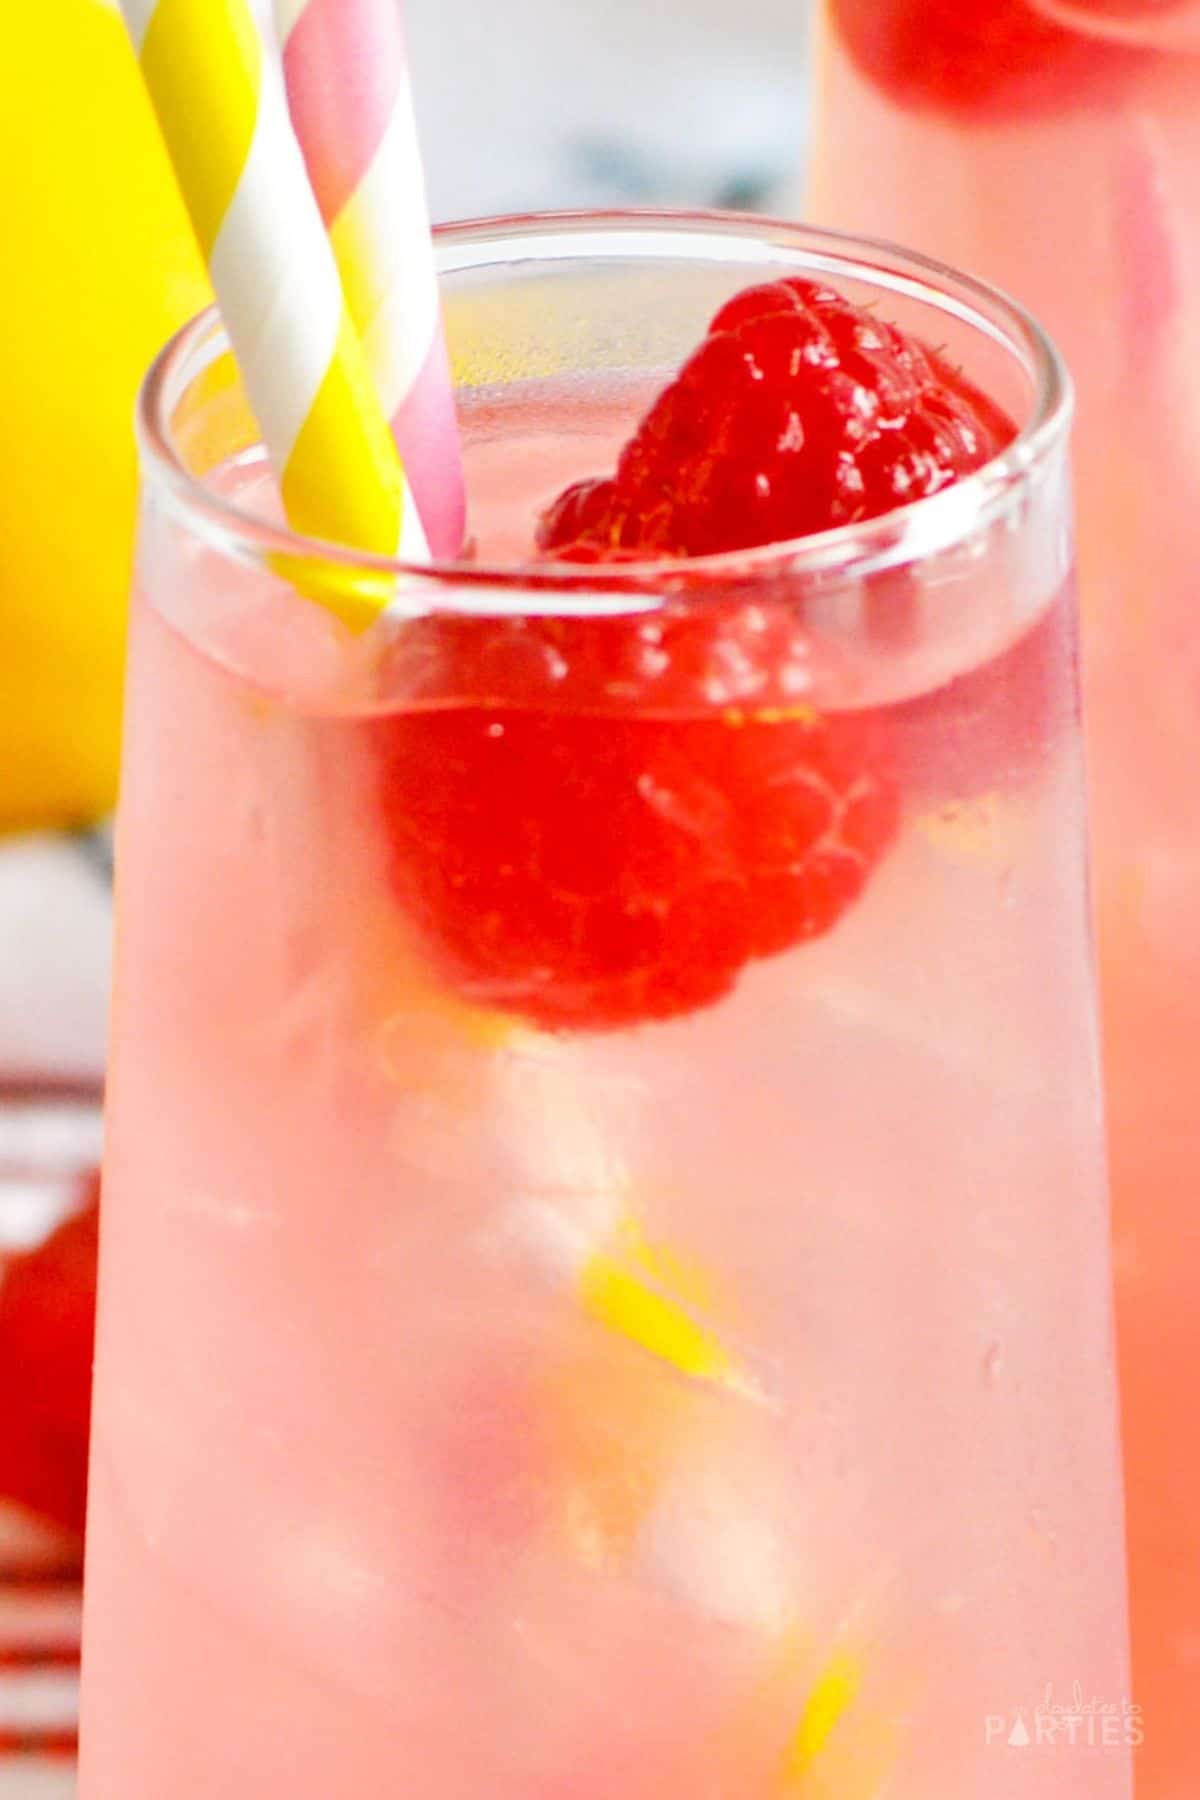 Close up view of a pink lemonade drink garnished with paper straws and fresh raspberries.